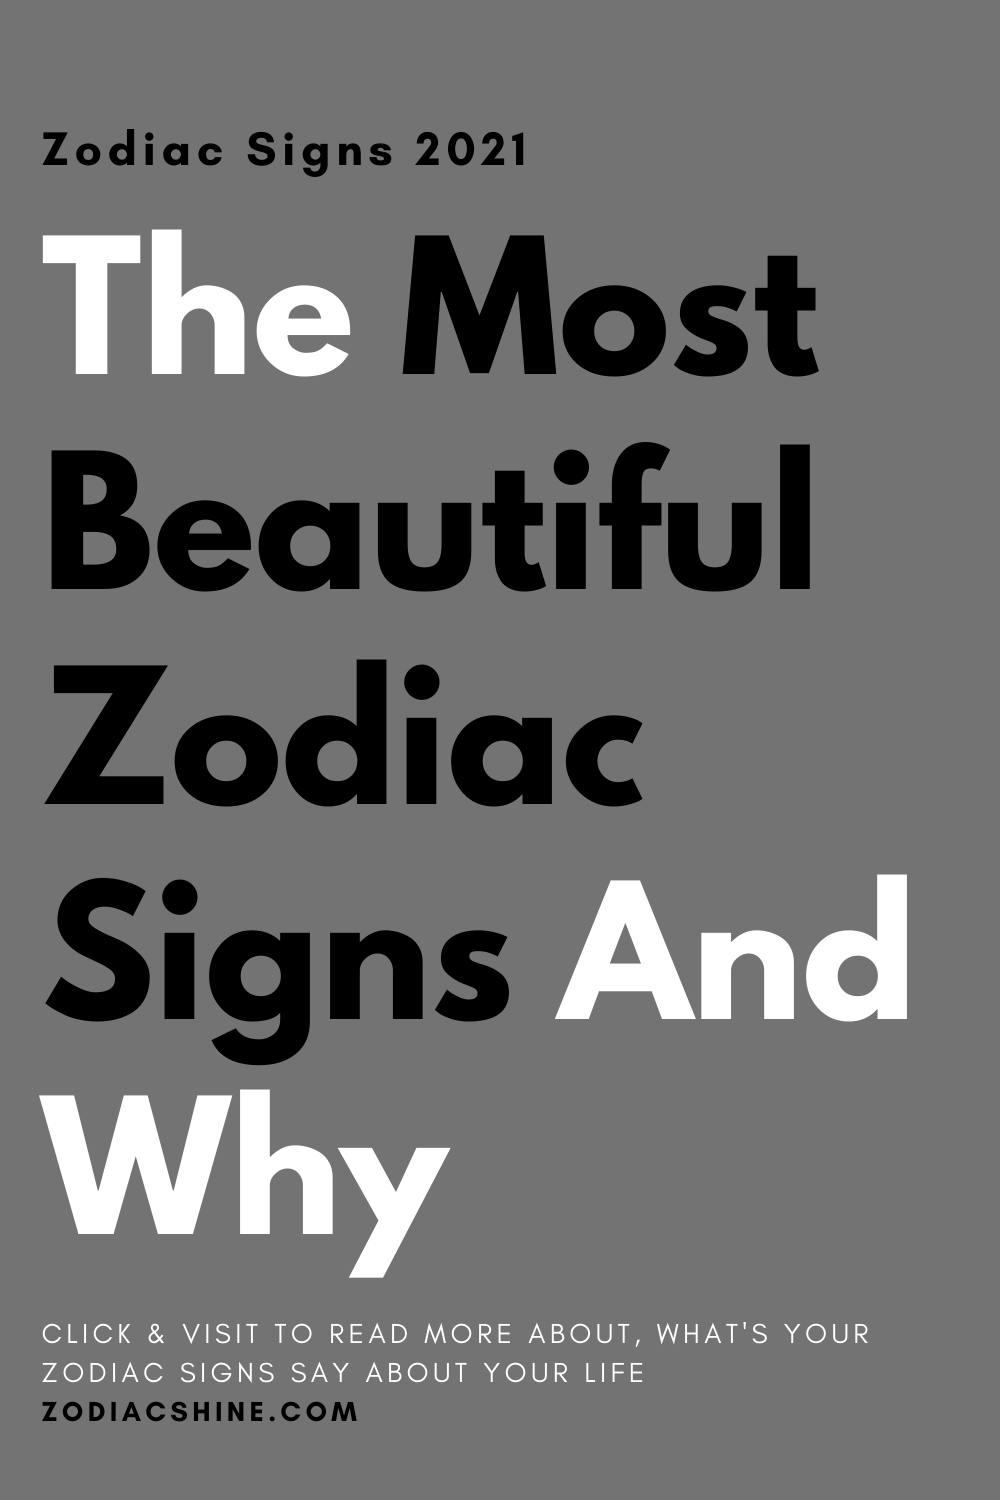 The Most Beautiful Zodiac Signs And Why